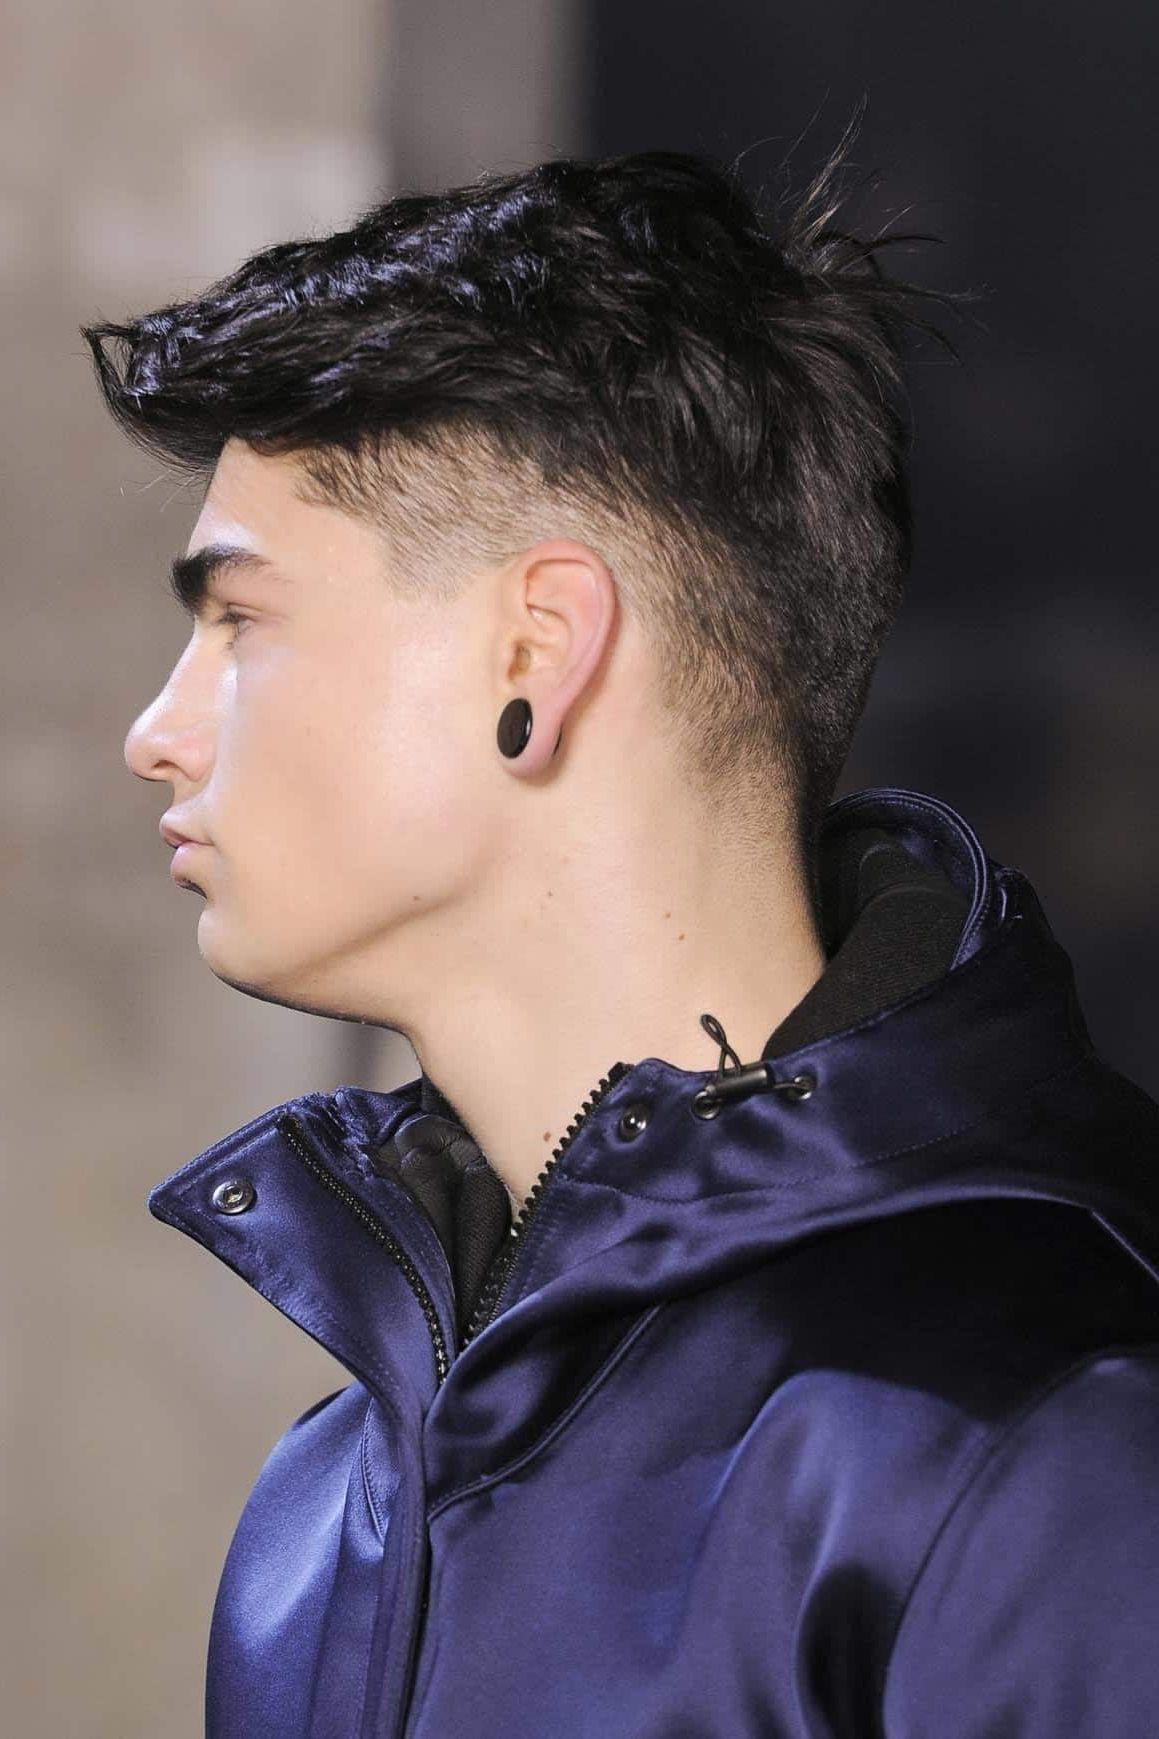 22 Looks That Prove The Taper Fade Is A Classic In Tapered Bowl Cut Hairstyles (View 9 of 20)